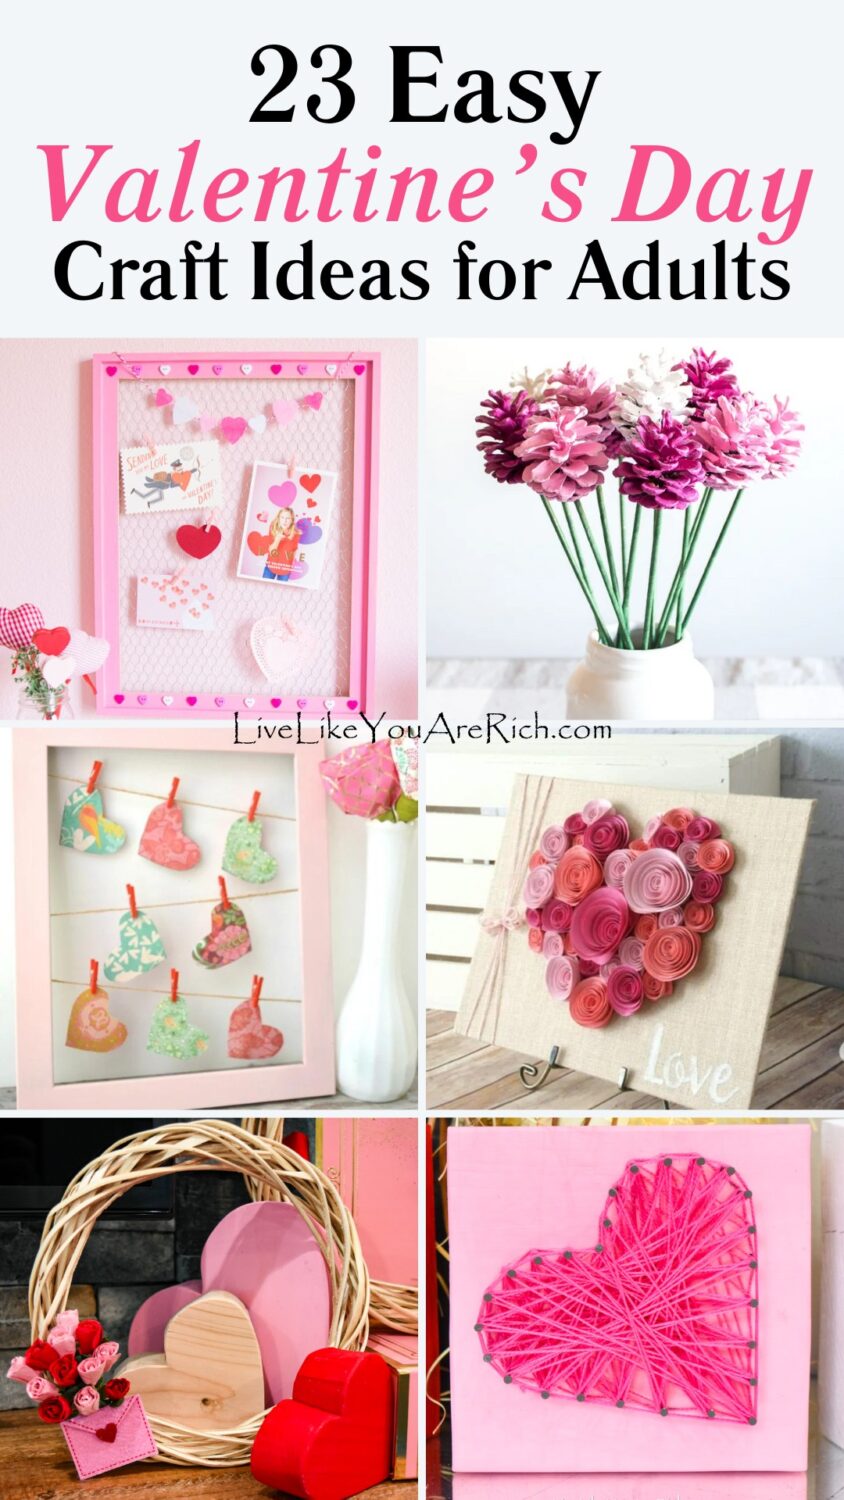 23 Easy Valentine's Day Craft Ideas for Adults